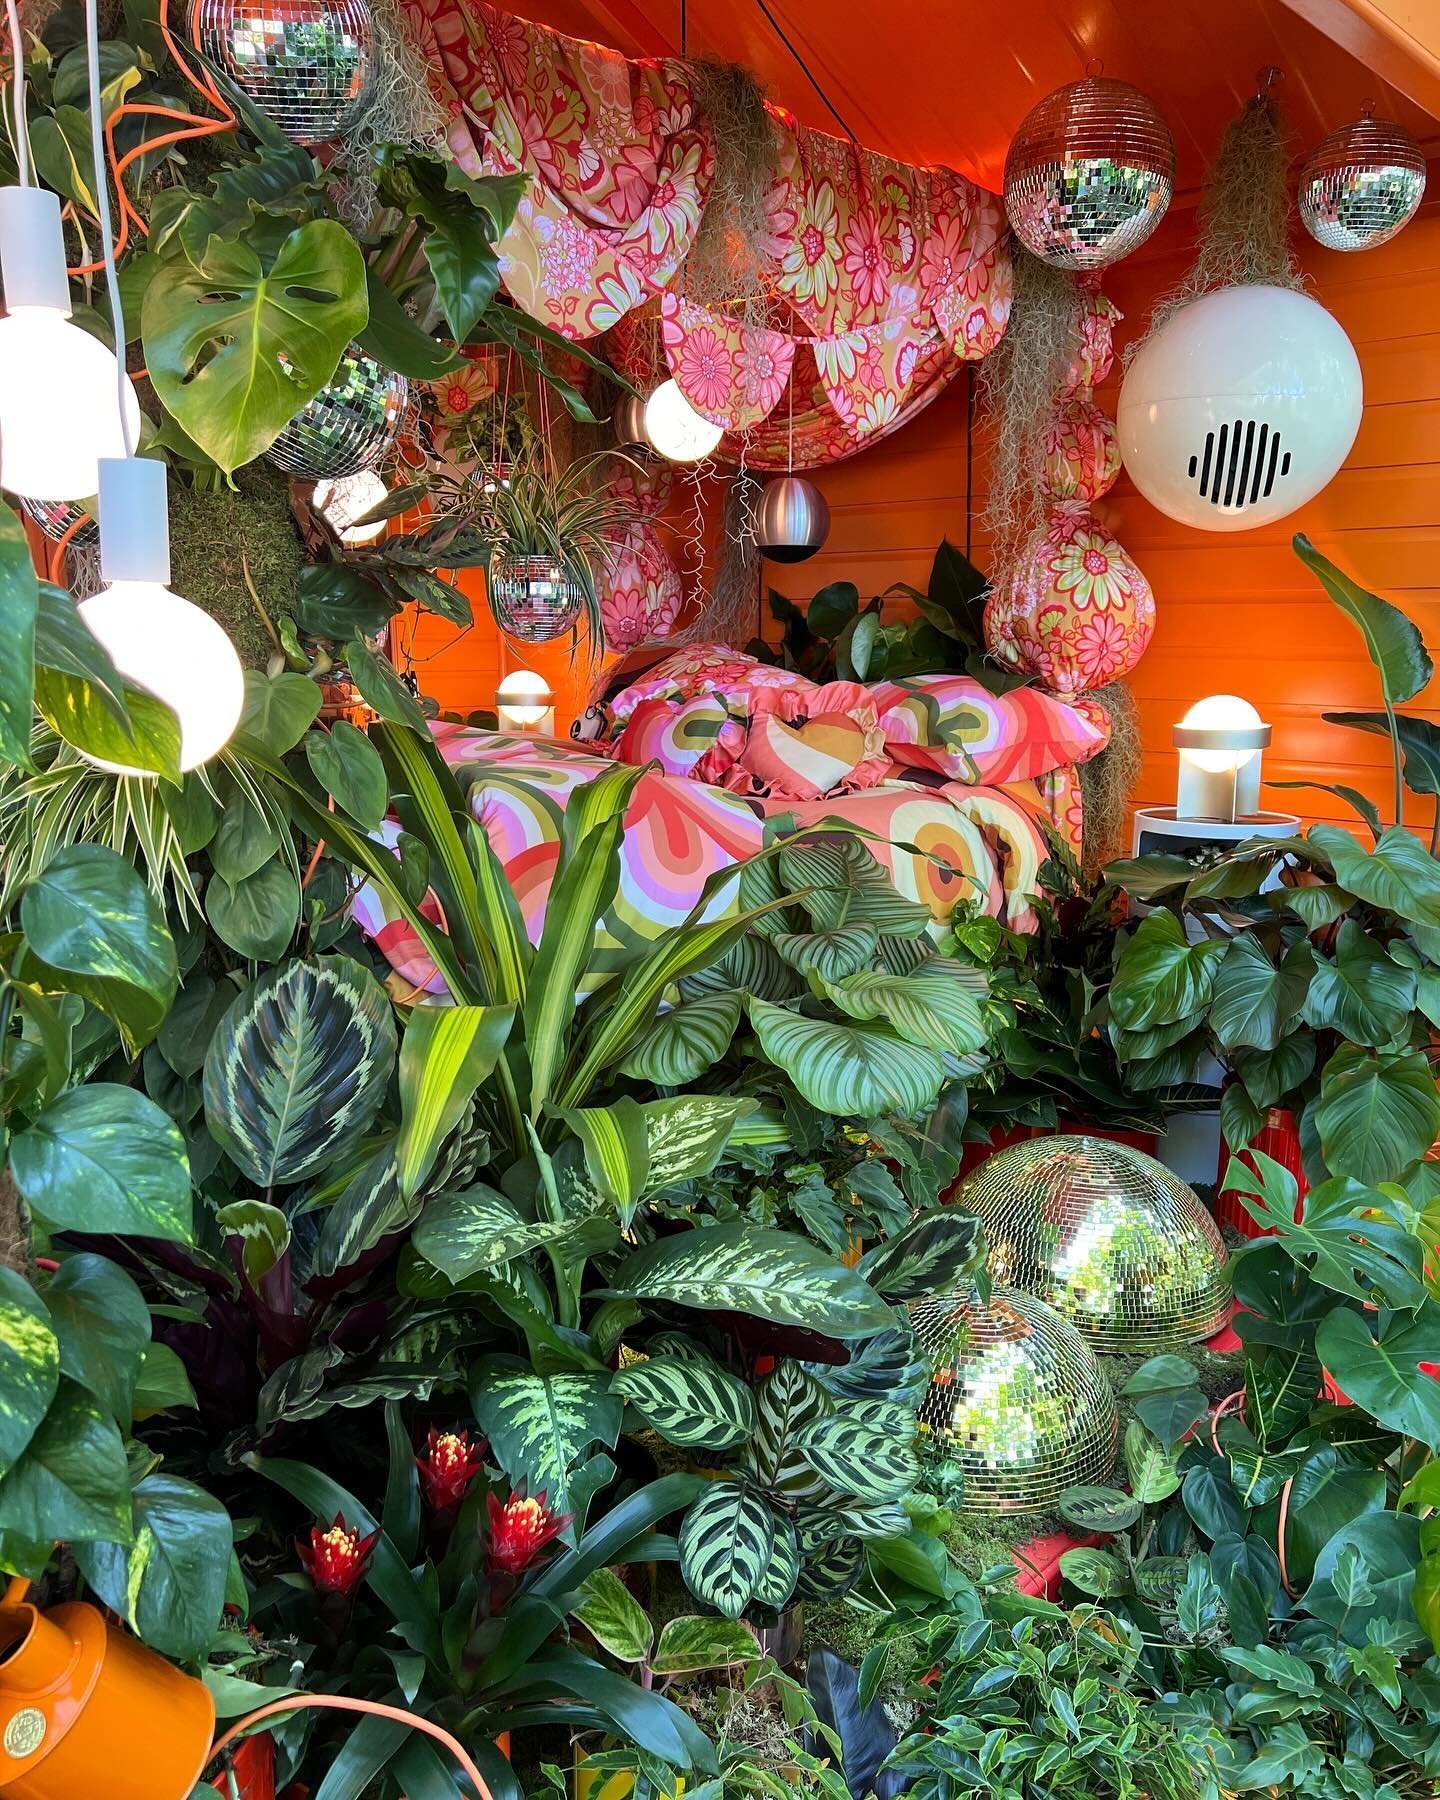 VERDANT VISIONS - Welcome to my Houseplant Studio at this year&rsquo;s RHS Chelsea Flower Show sponsored by @findmypast 

Thanks you so much to everyone involved in this project! It&rsquo;s quite literally been a dream 🪩 🧡🪴

@malverngardenbuilding